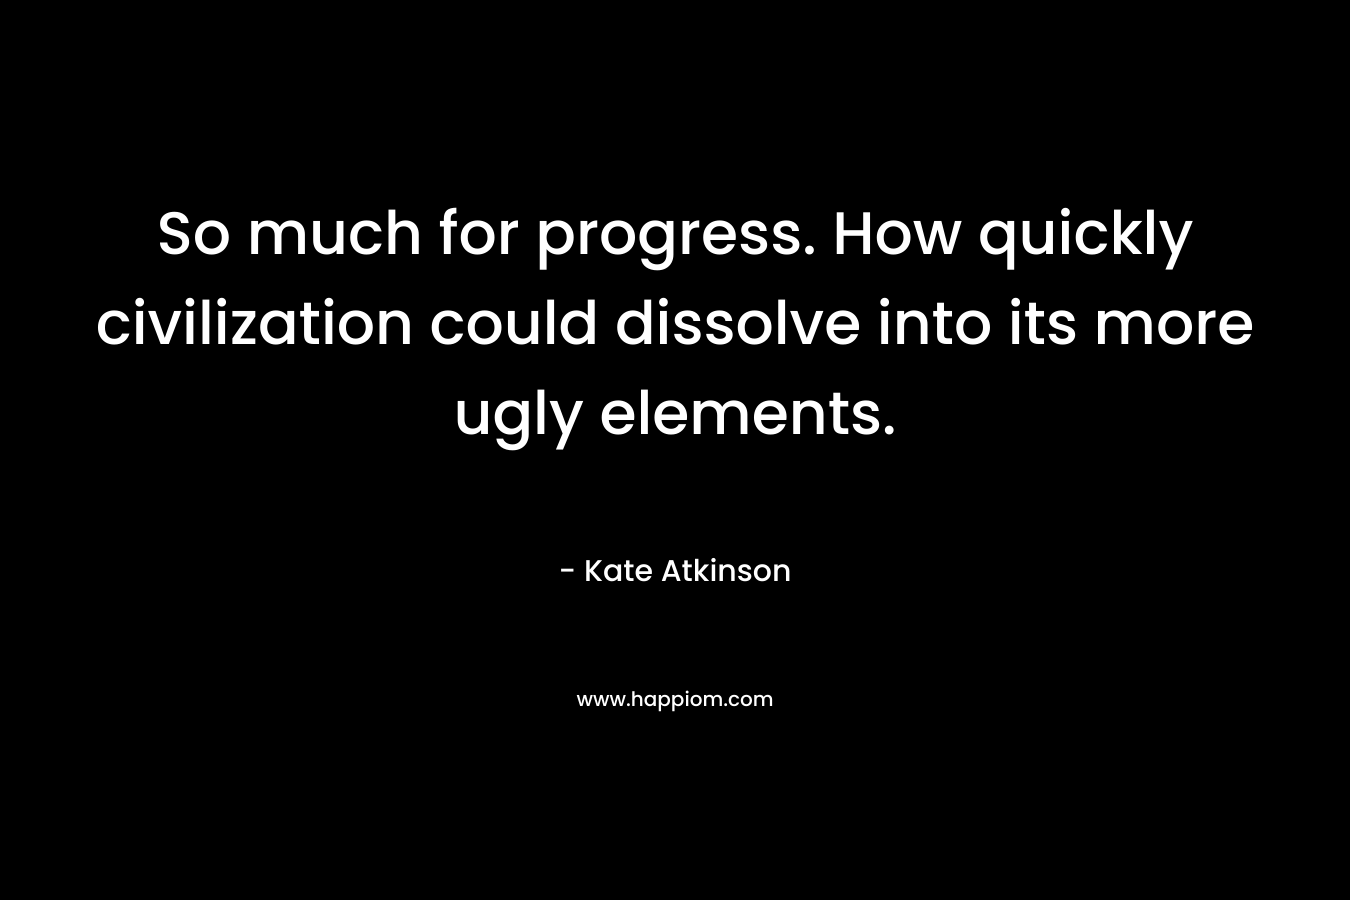 So much for progress. How quickly civilization could dissolve into its more ugly elements. – Kate Atkinson